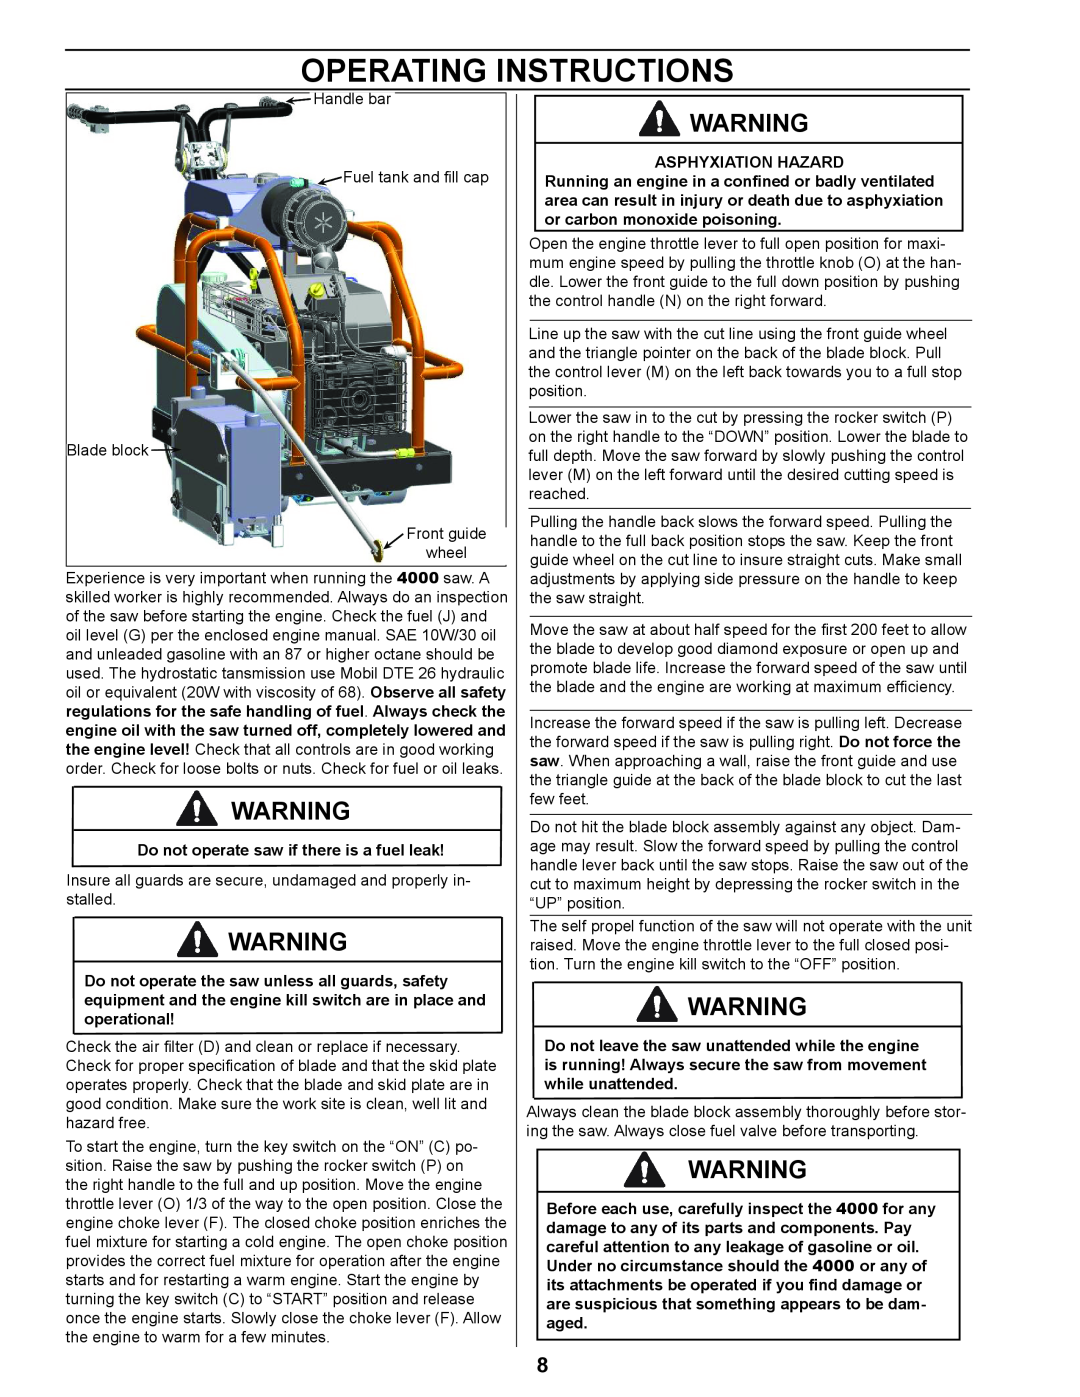 Husqvarna 4000 manuel dutilisation Operating Instructions, Do not operate saw if there is a fuel leak 